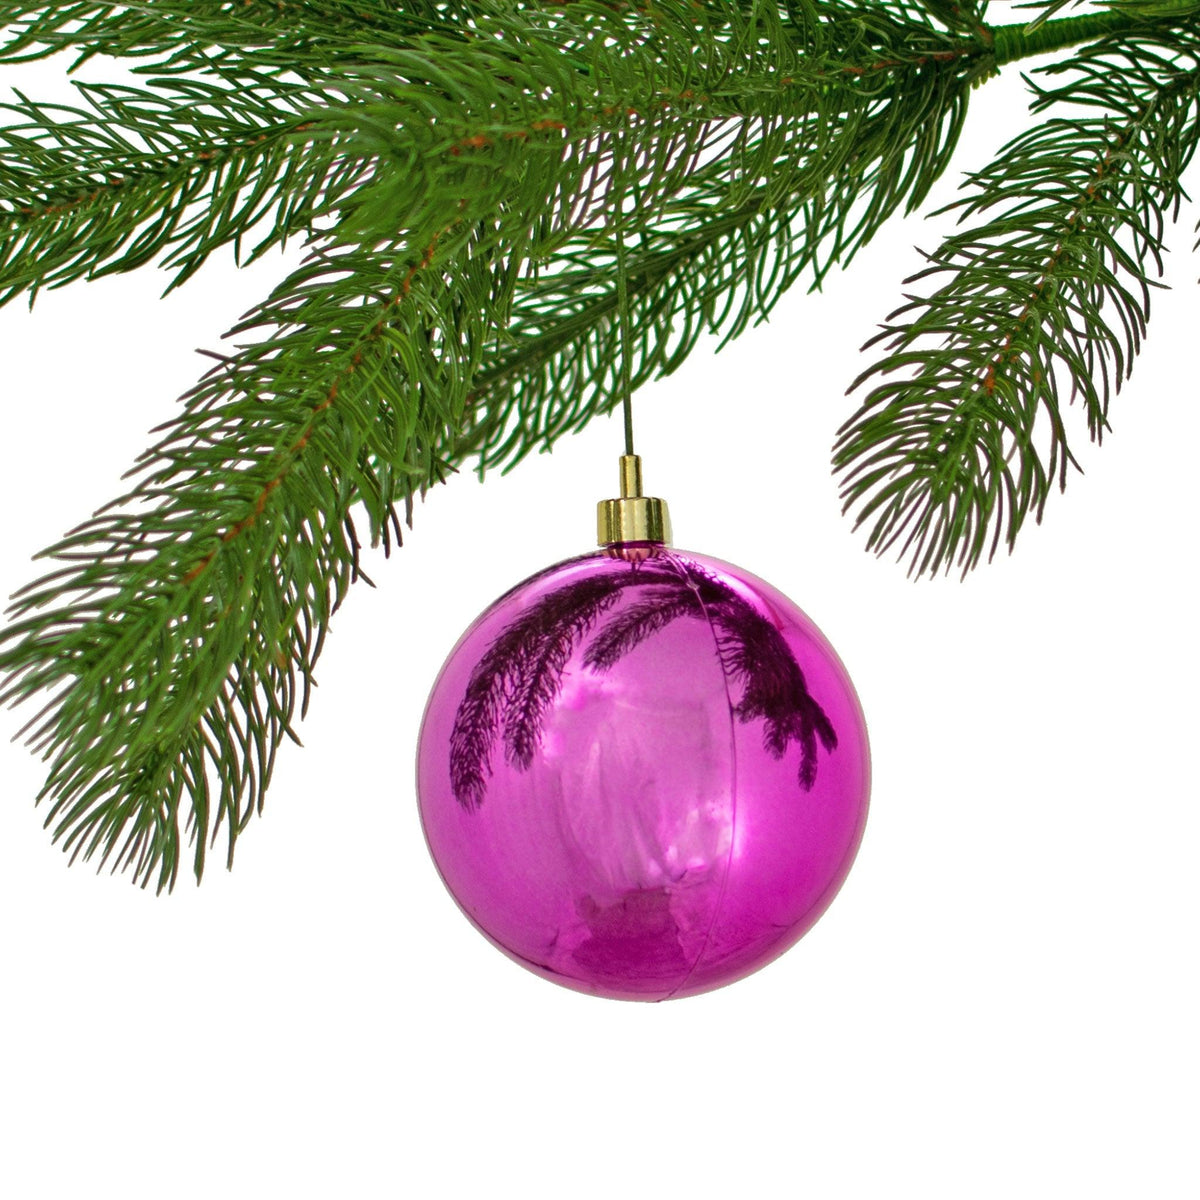 Lee Display offers brand new Shiny Pink Plastic Ball Ornaments at wholesale prices for affordable Christmas Tree Hanging and Holiday Decorating on sale at leedisplay.com